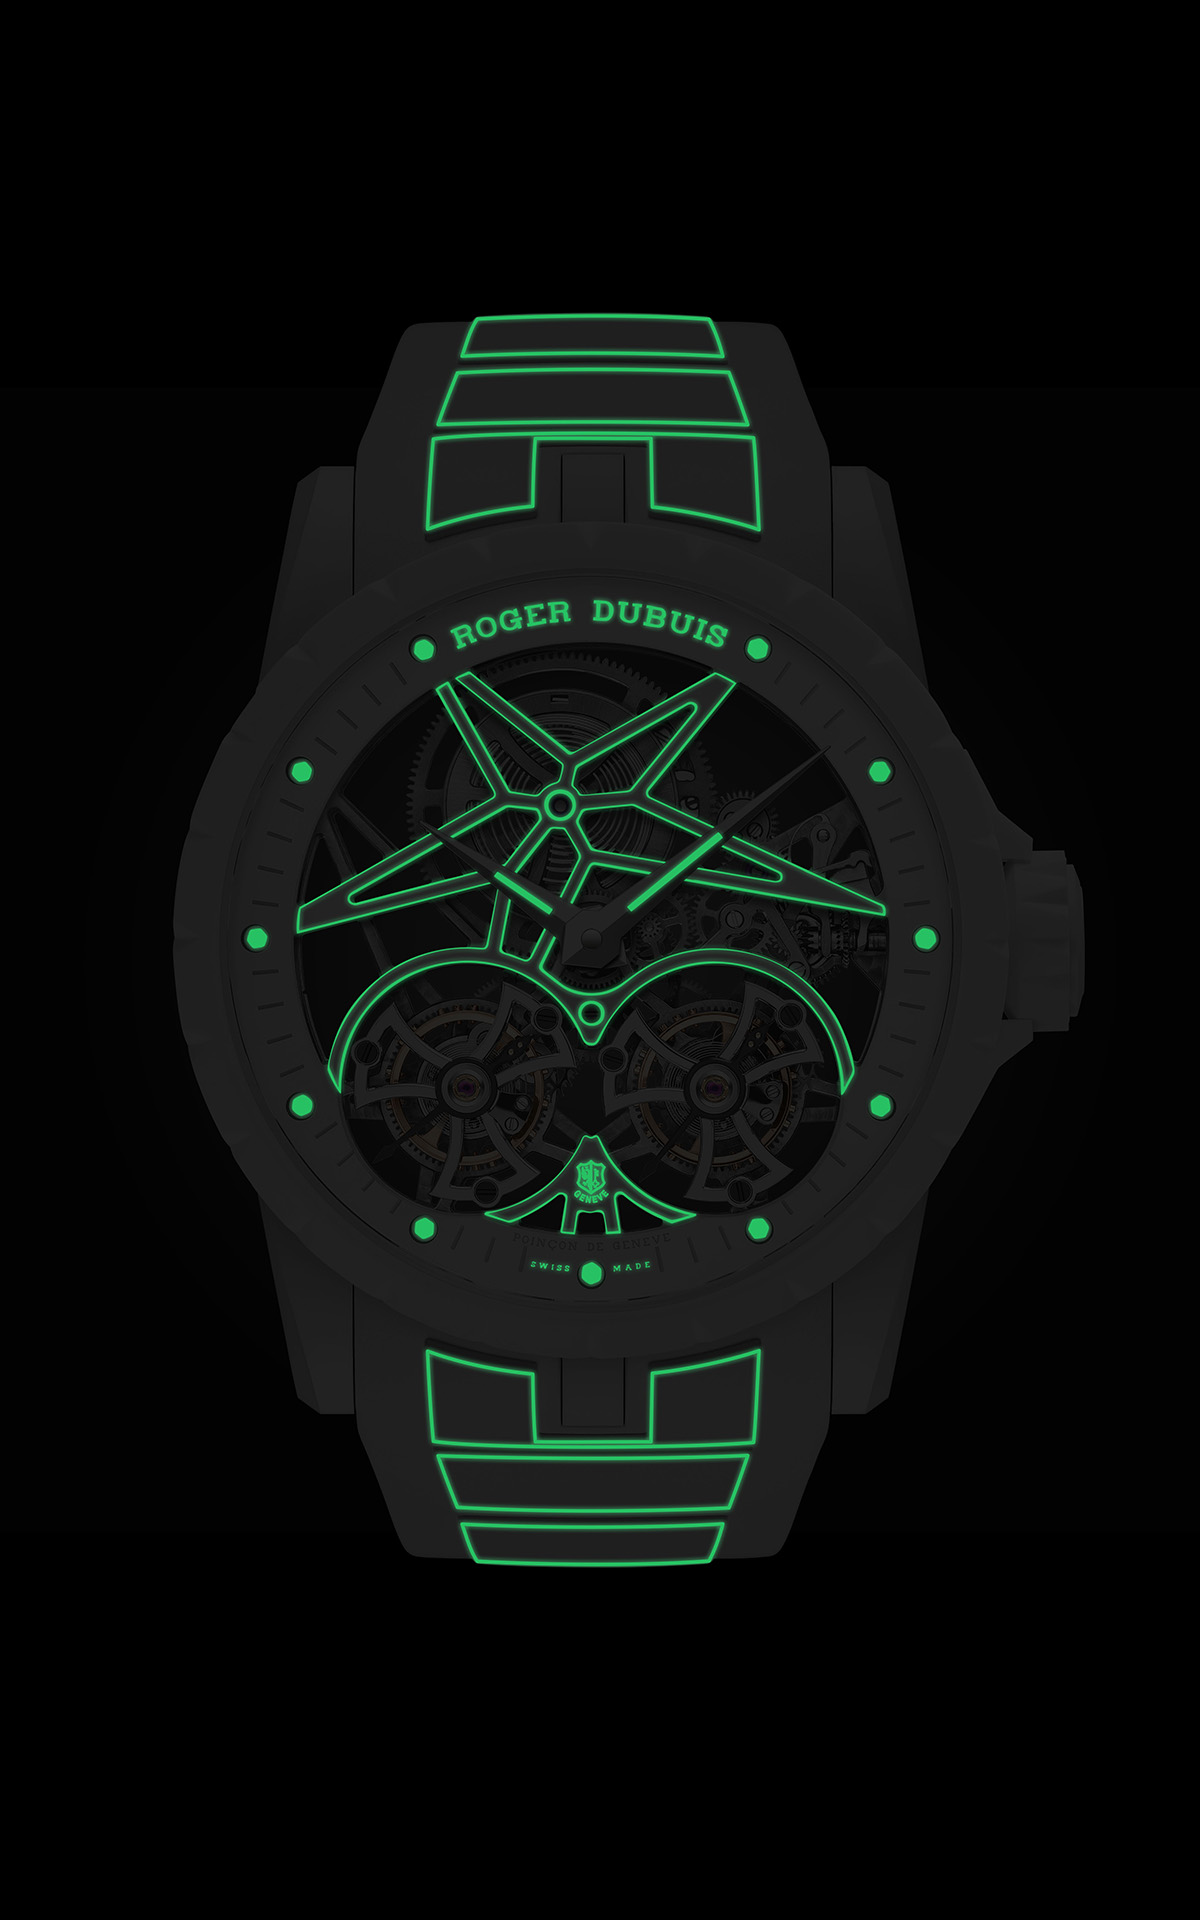 Roger Dubuis Excalibur Twofold frontal negro fx